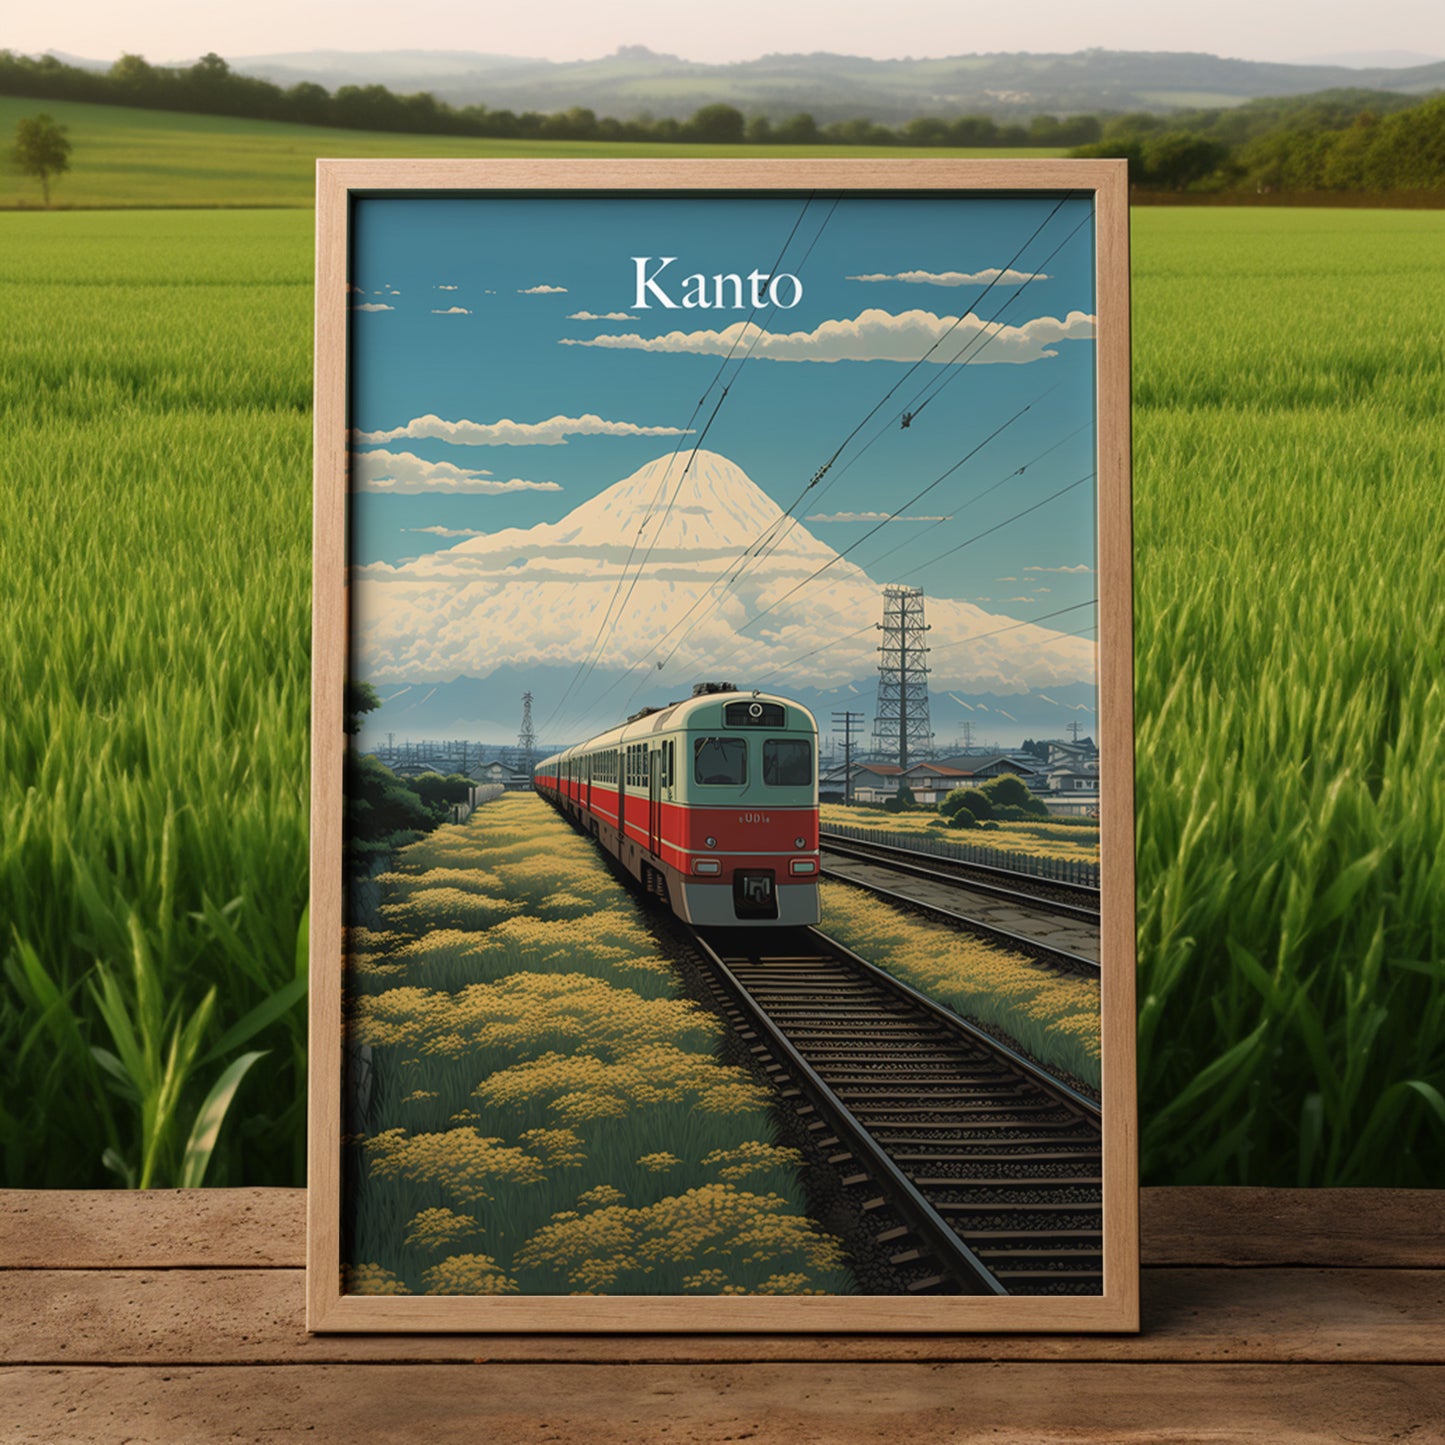 A framed poster of a train in the Kanto region with Mount Fuji in the background, displayed on a wooden surface.